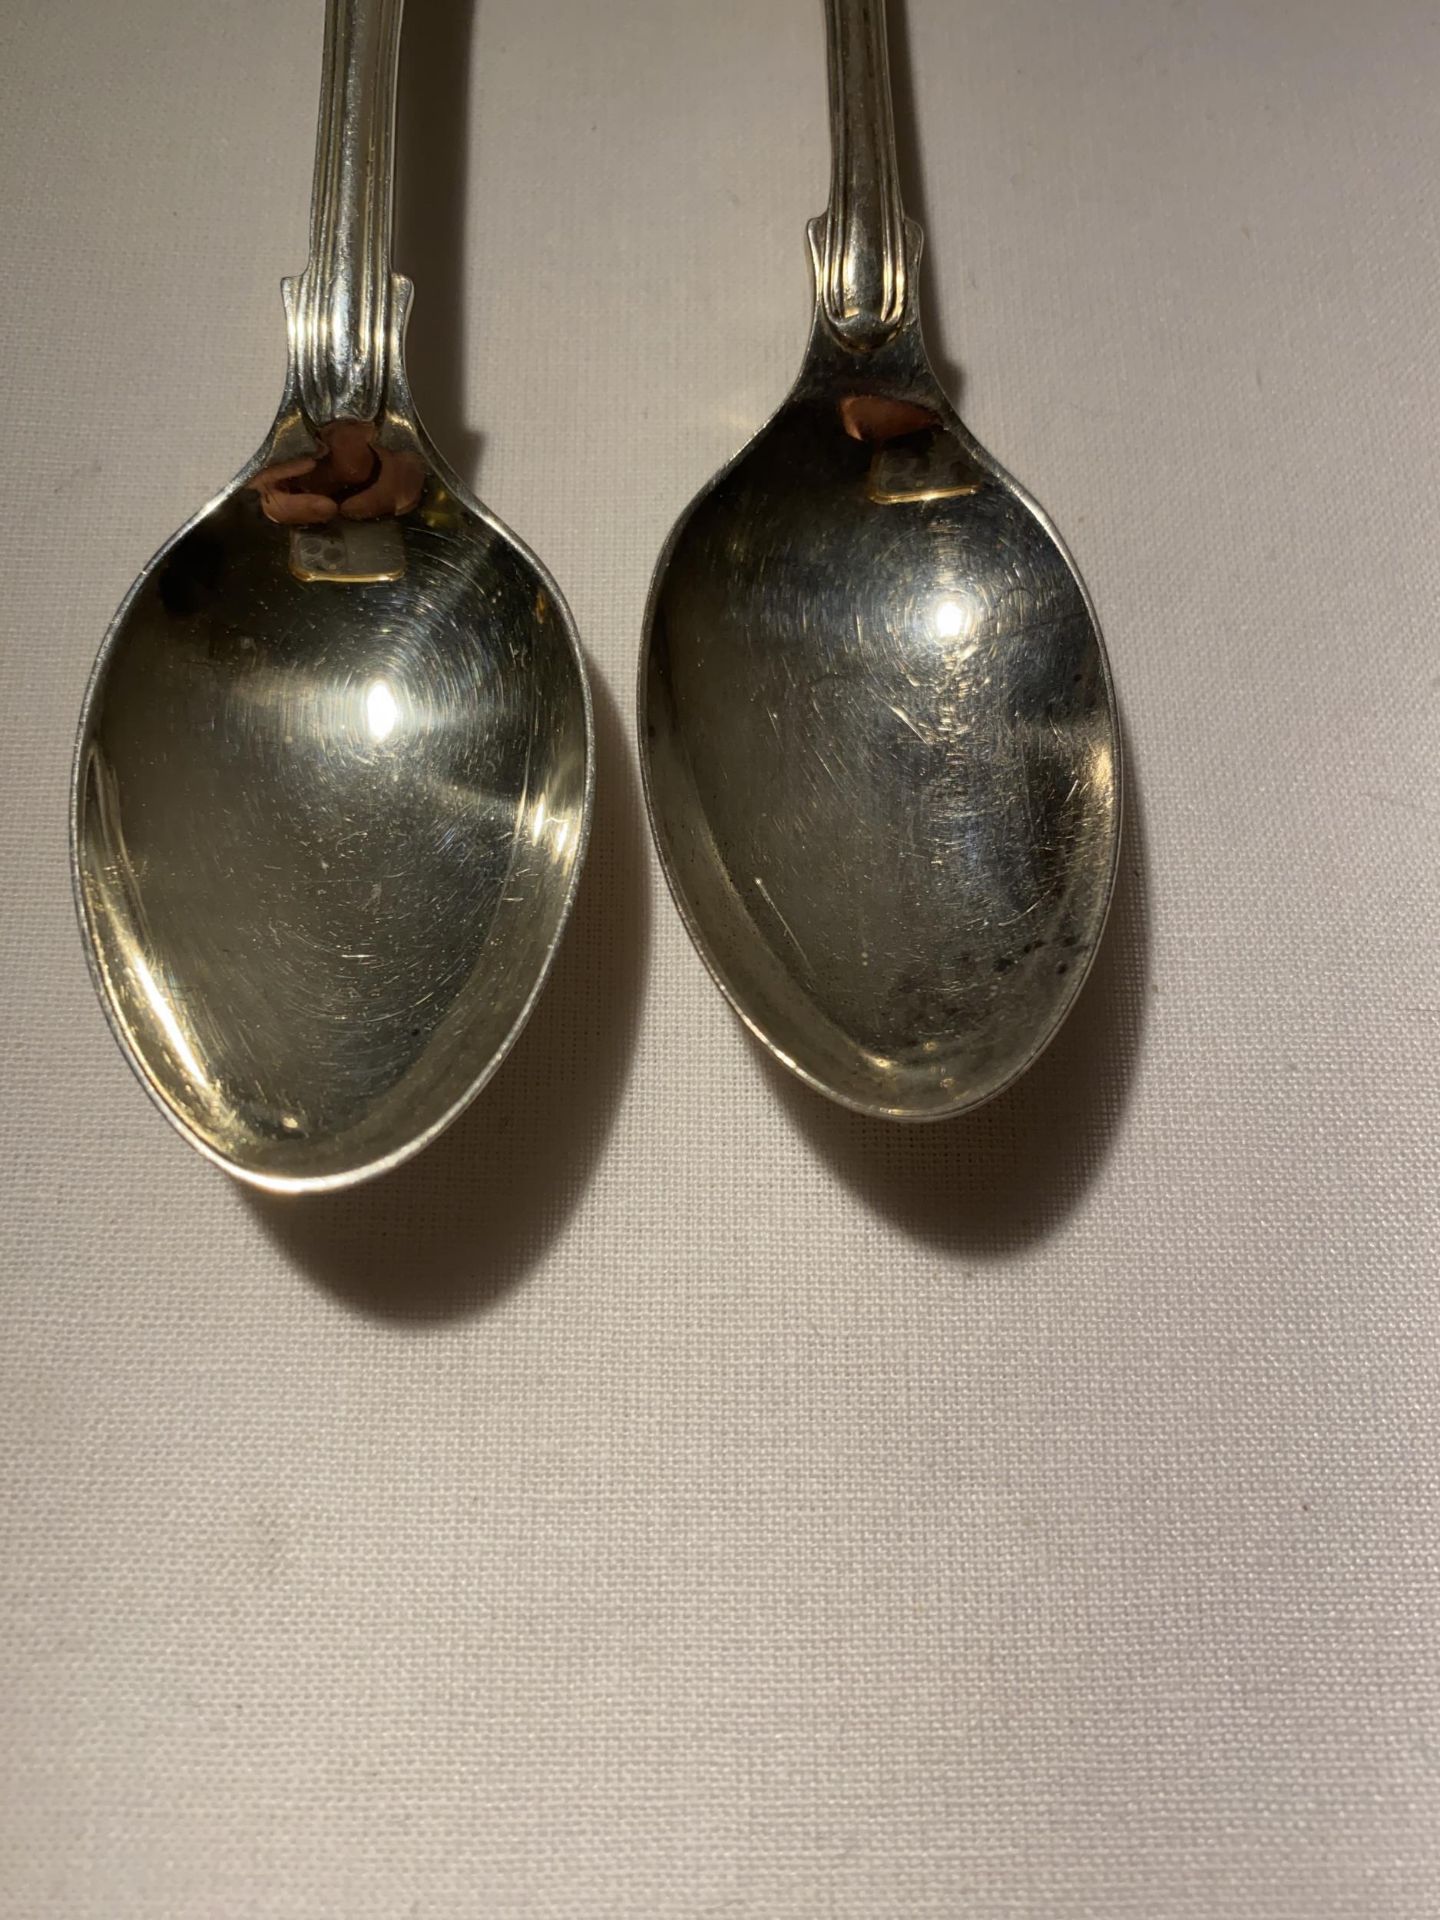 TWO SHEFFIELD HALLMARKED SILVER SPOONS, EARLIEST BEING 1925, MAKER WILLIAM HUTTON & SONS LTD, - Image 6 of 18